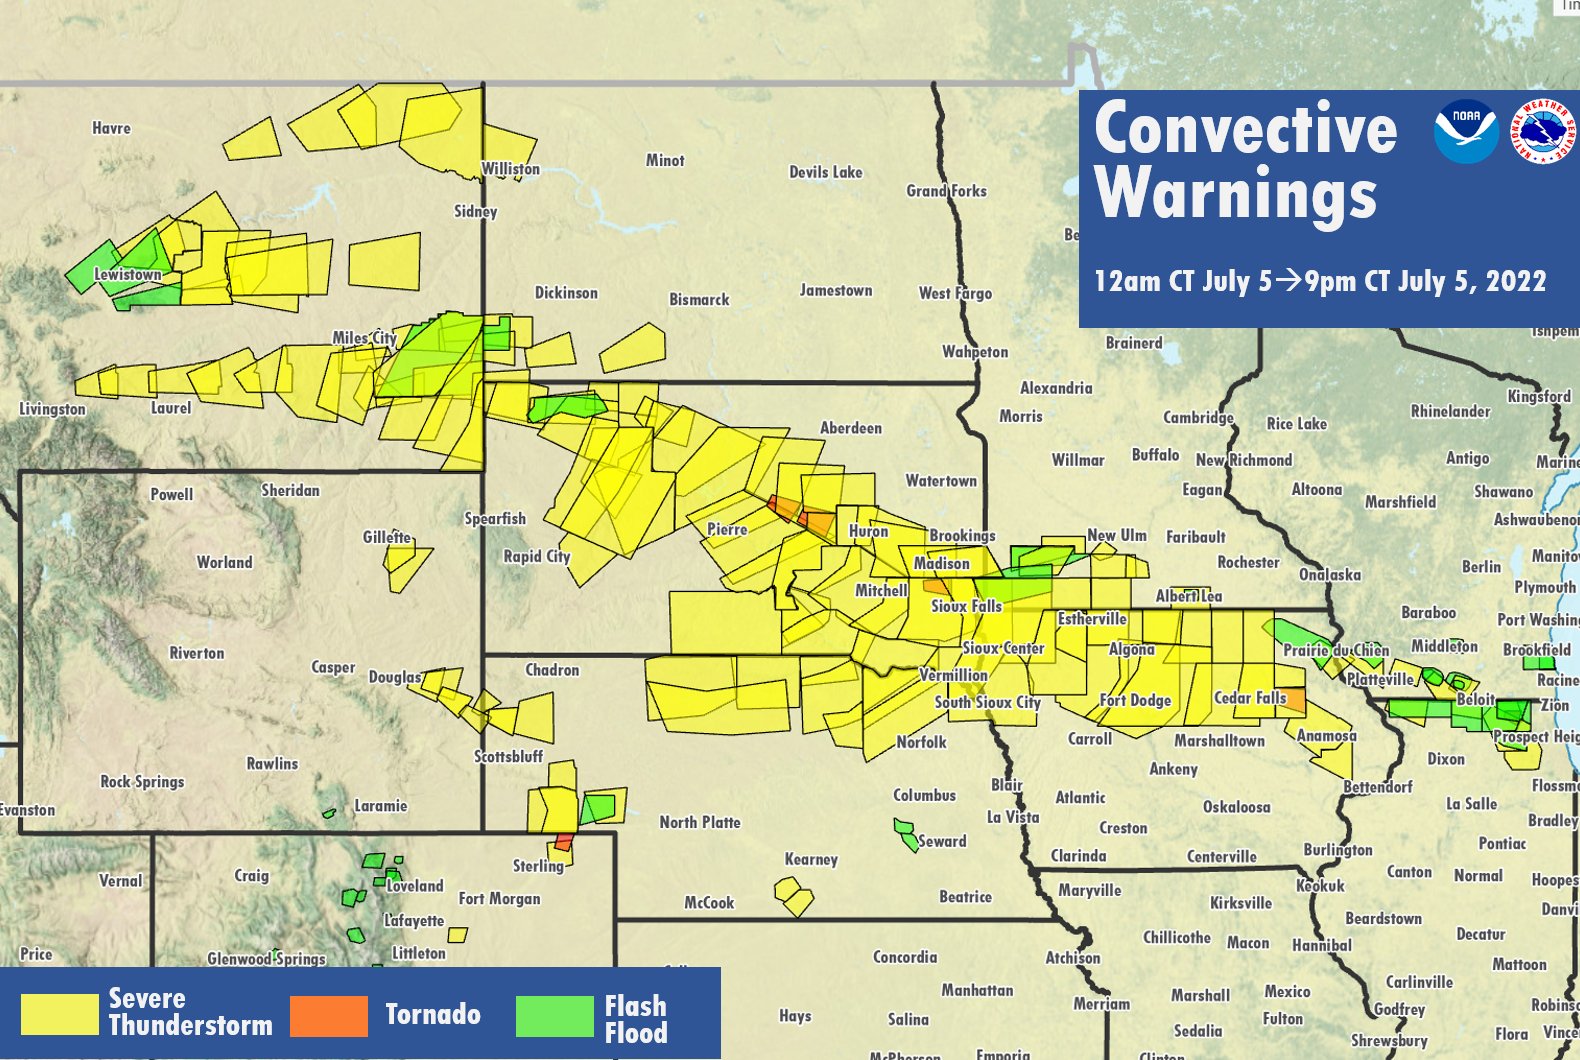 Convective Warnings that were issued during the event - Image created by NWS Sioux Falls, SD